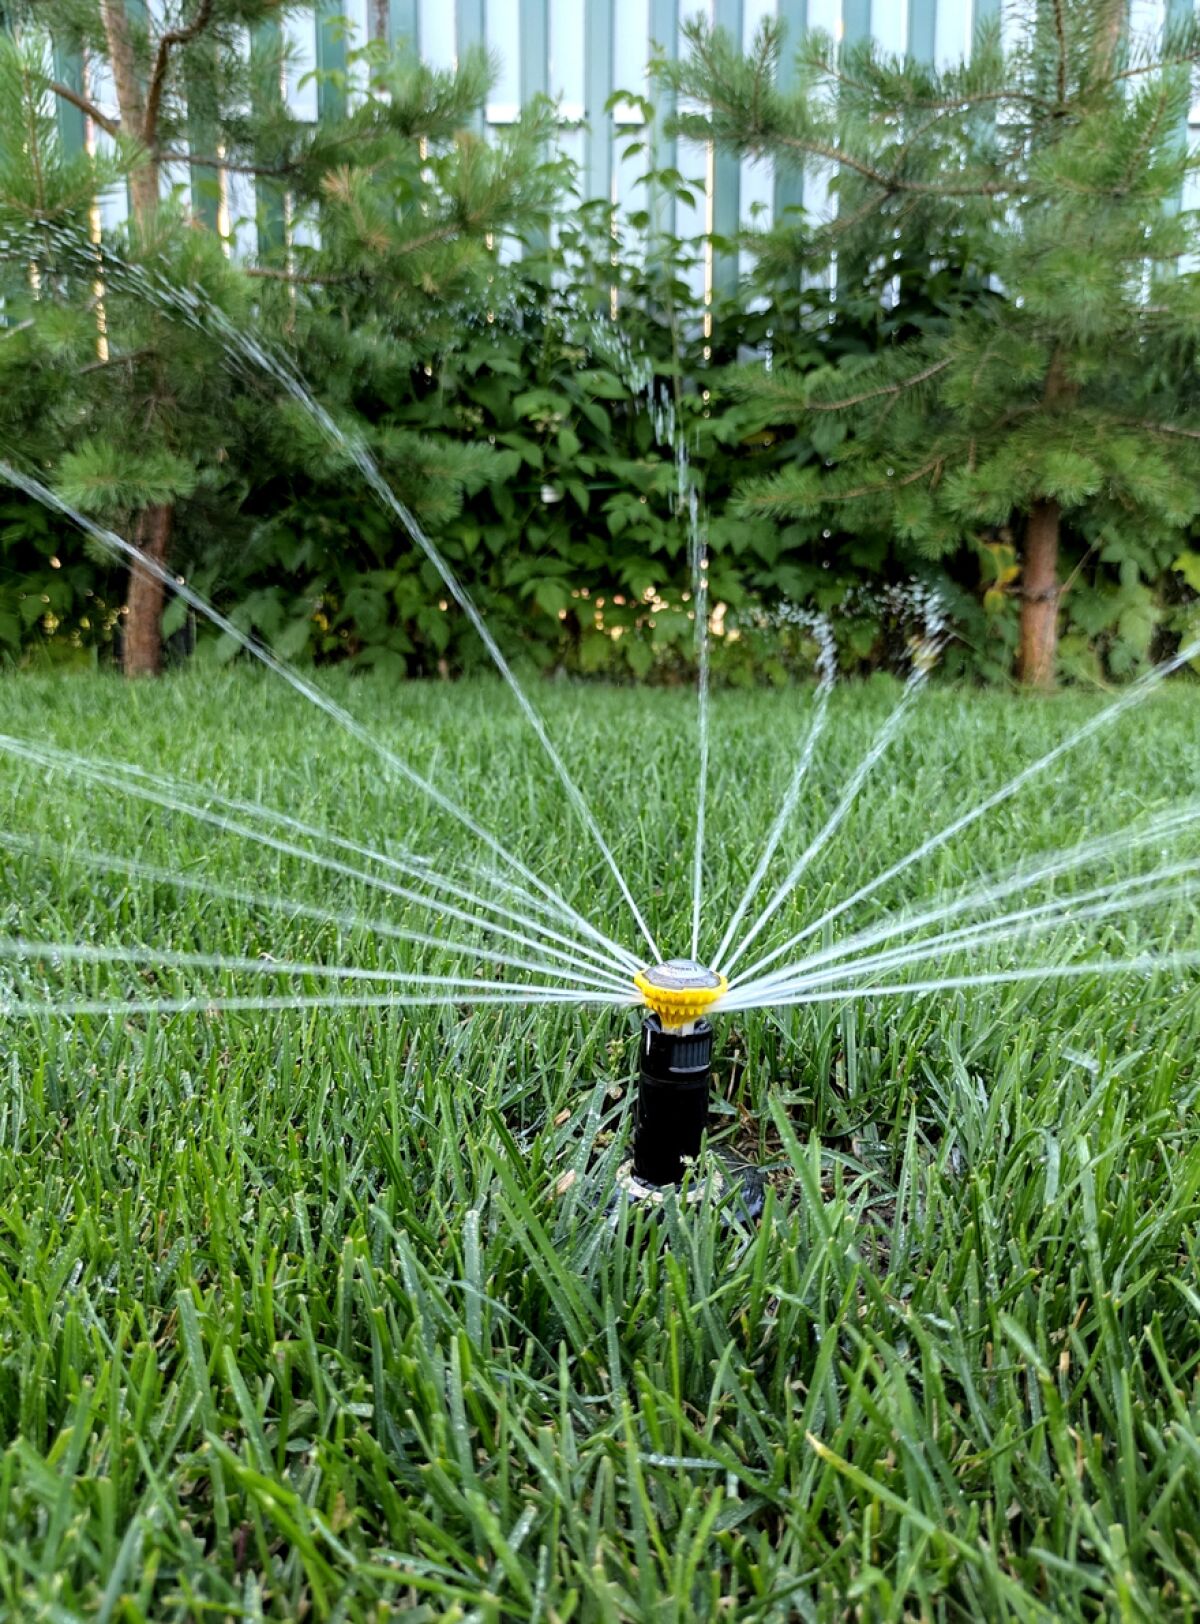 If you use sprinklers, make sure they’re functioning properly and consider a smart controller to automate their timing.